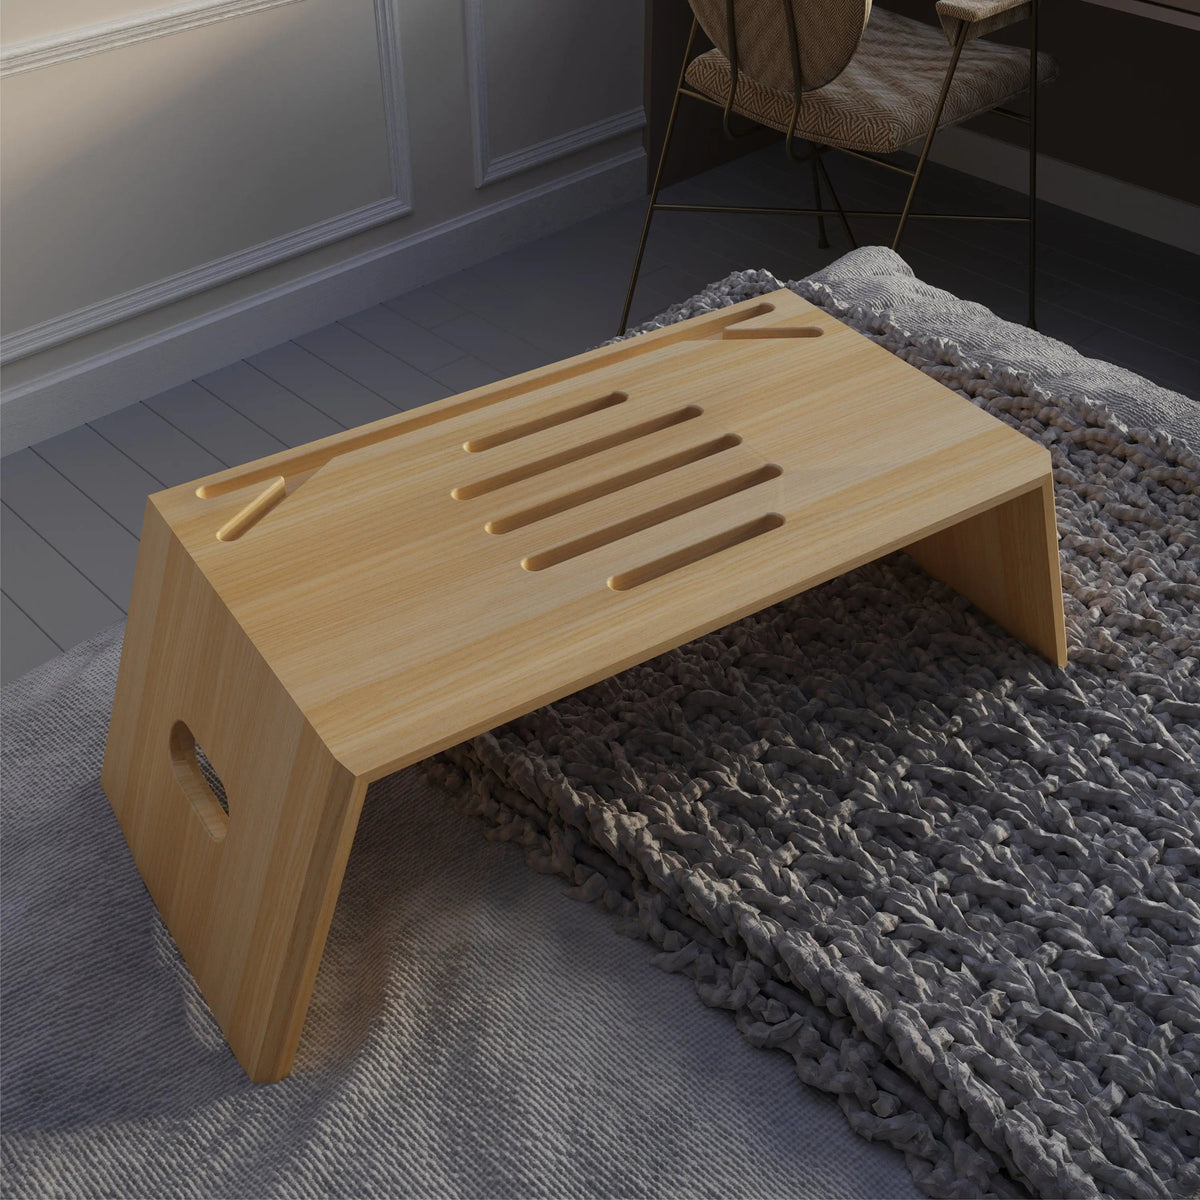 Wooden Foldable Laptop Stand On Wooden